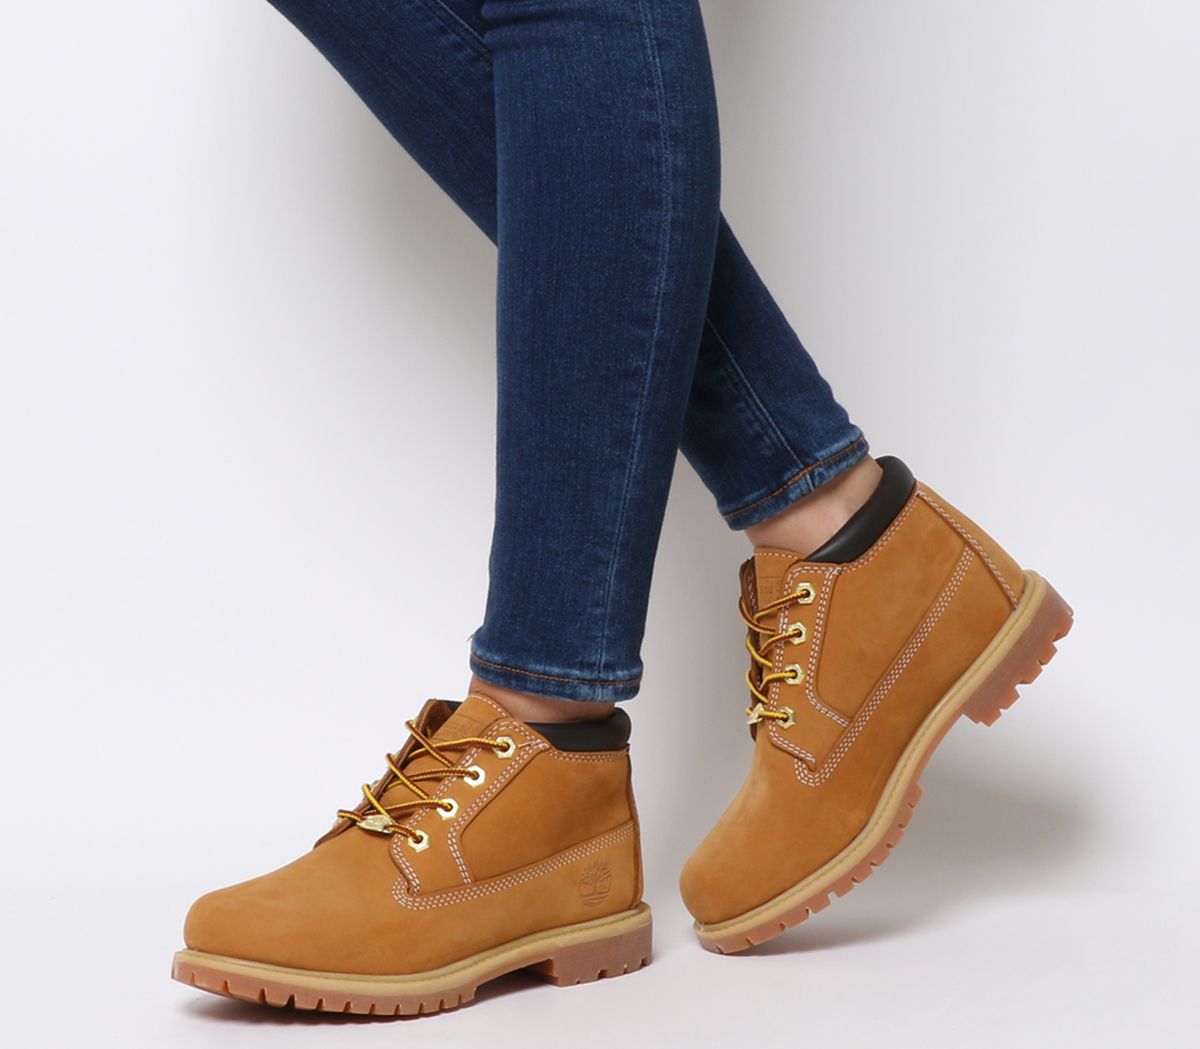 Timberland Nellie Chukka Double Waterproof Boots Wheat Nubuck - Ankle Boots